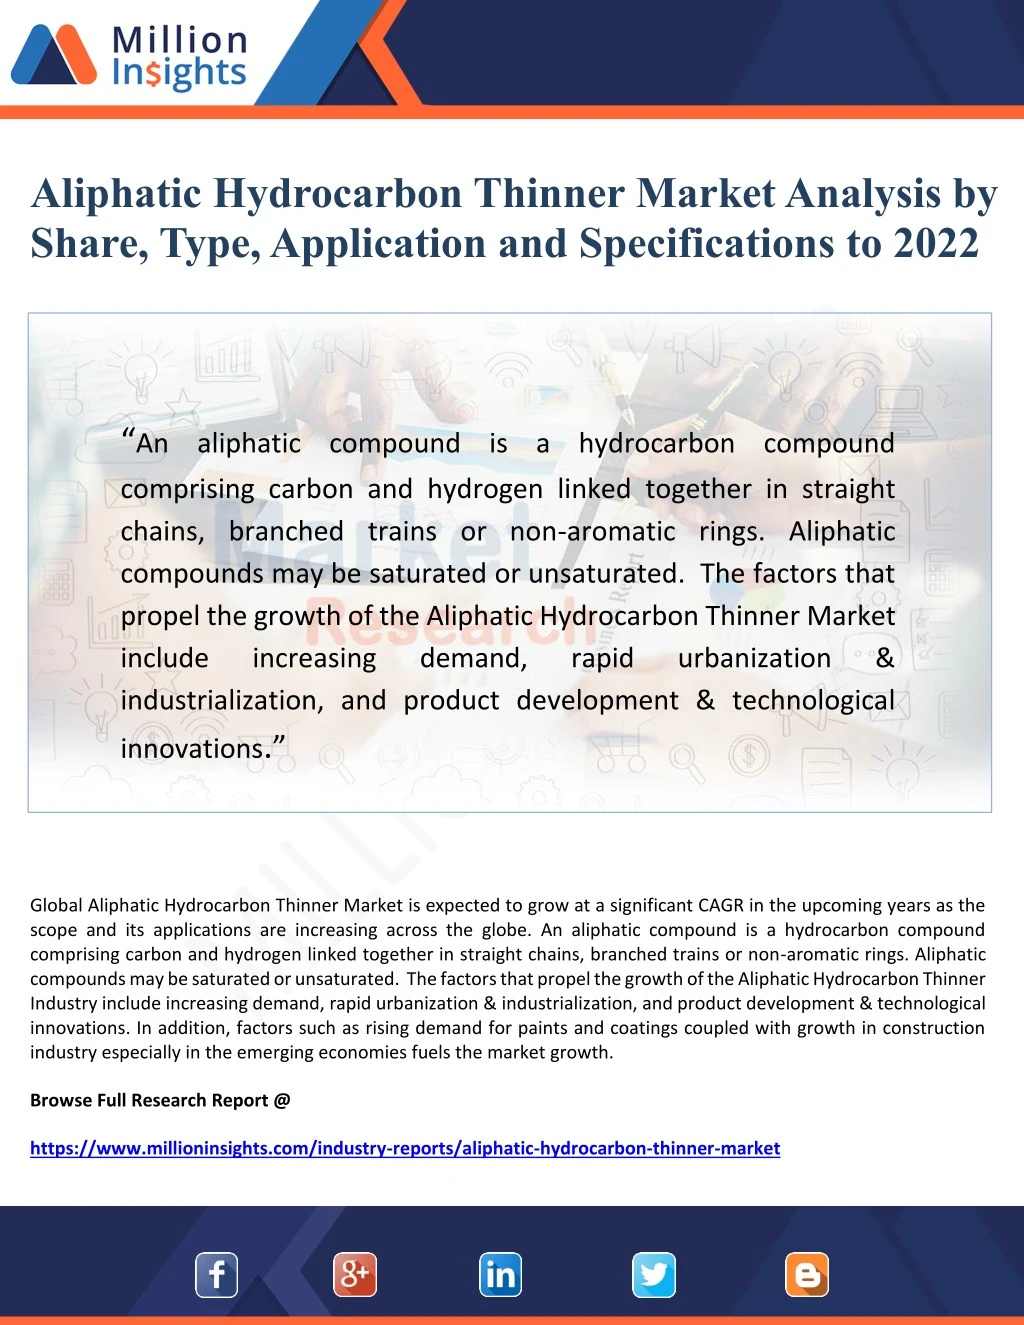 aliphatic hydrocarbon thinner market analysis